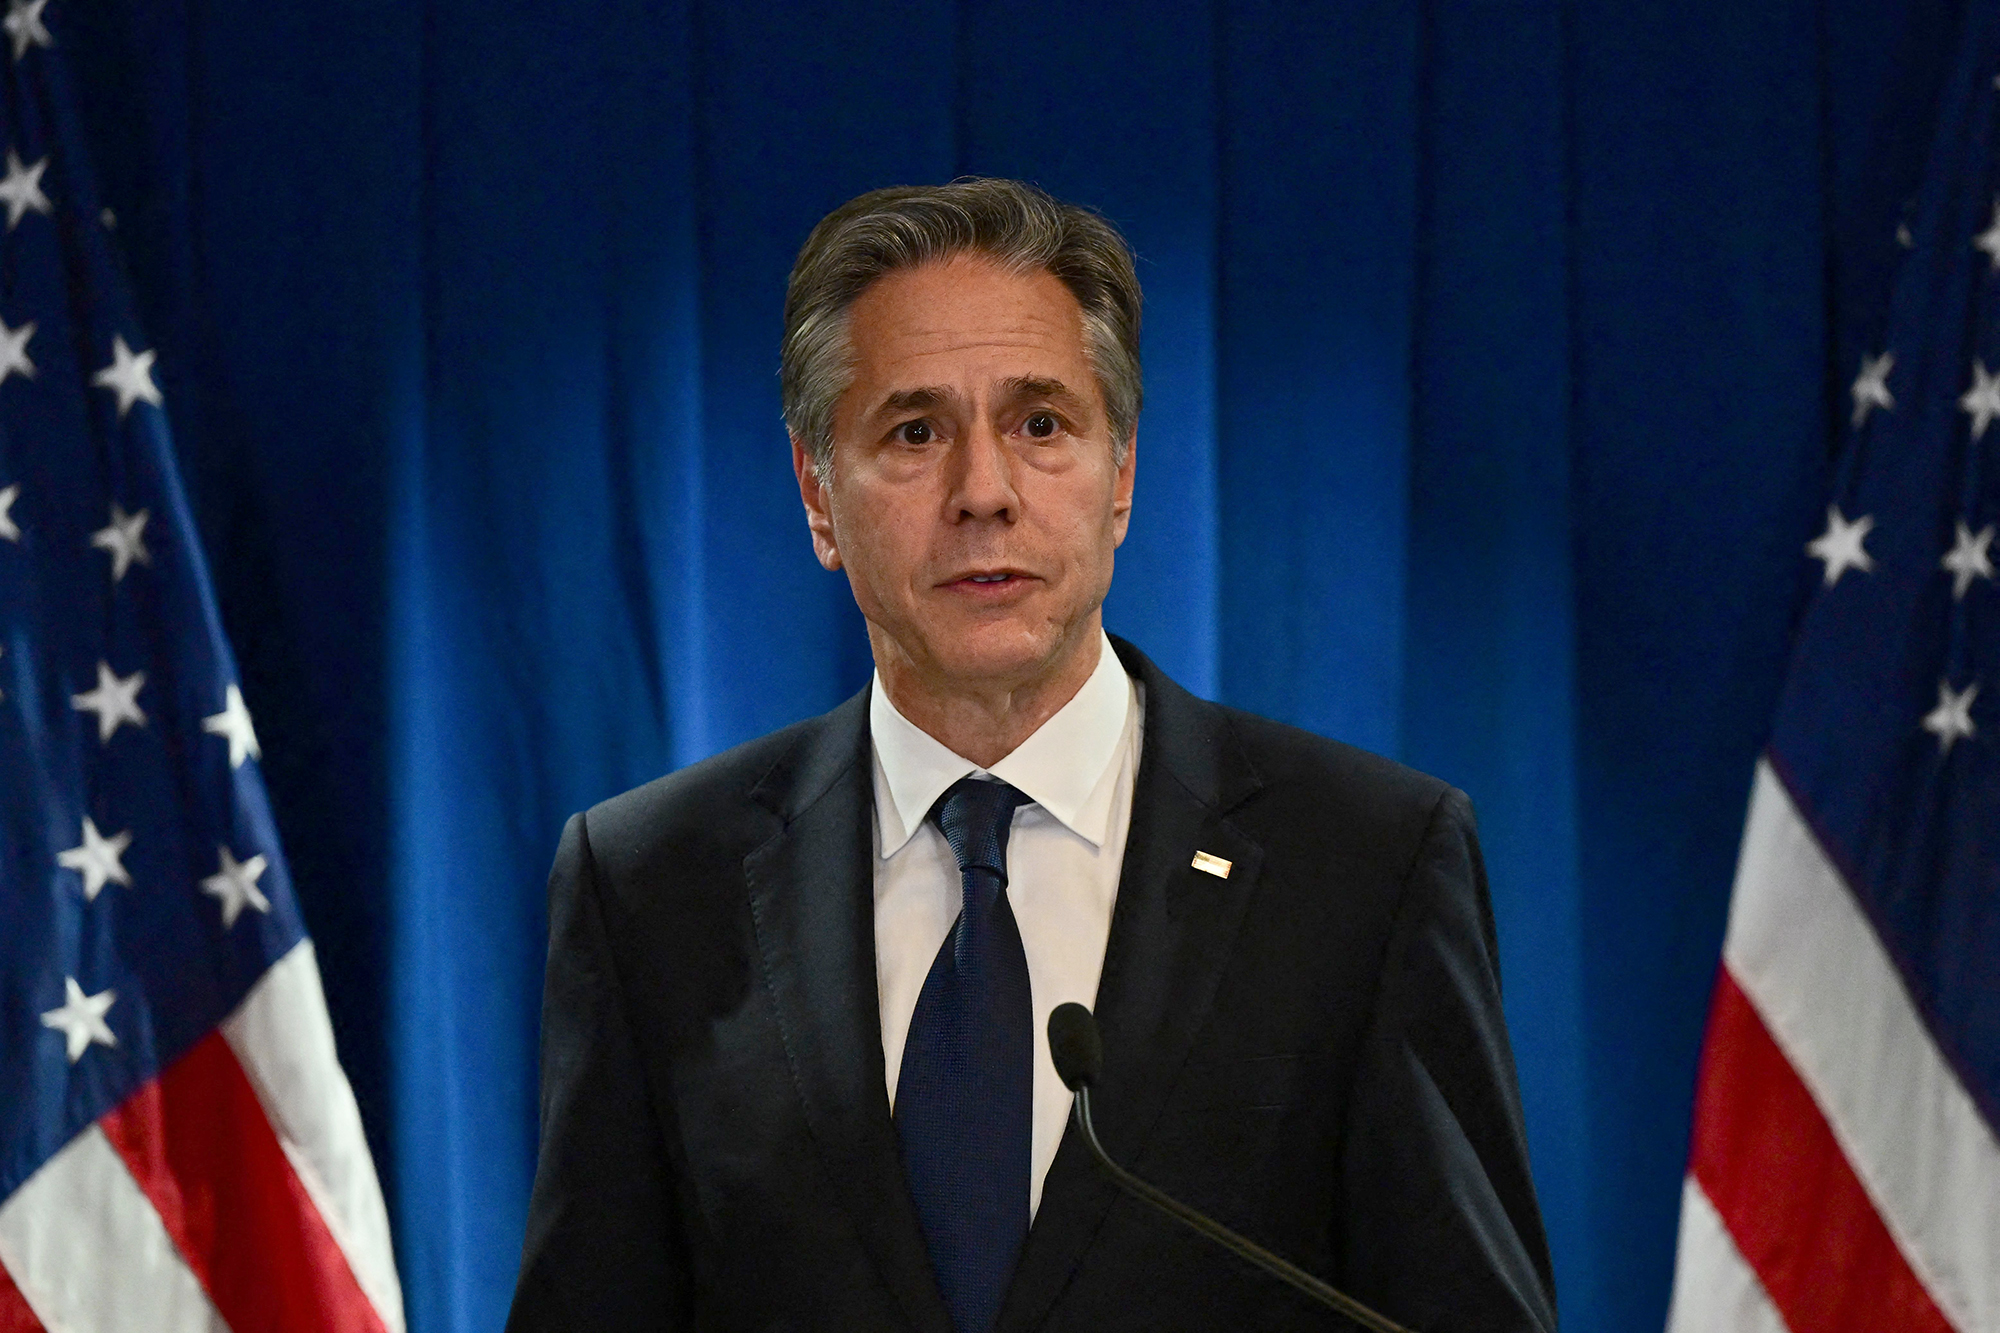 US Secretary of State Antony Blinken speaks during a news conference at the Beijing American Center of the US Embassy in Beijing, China, on June 19.